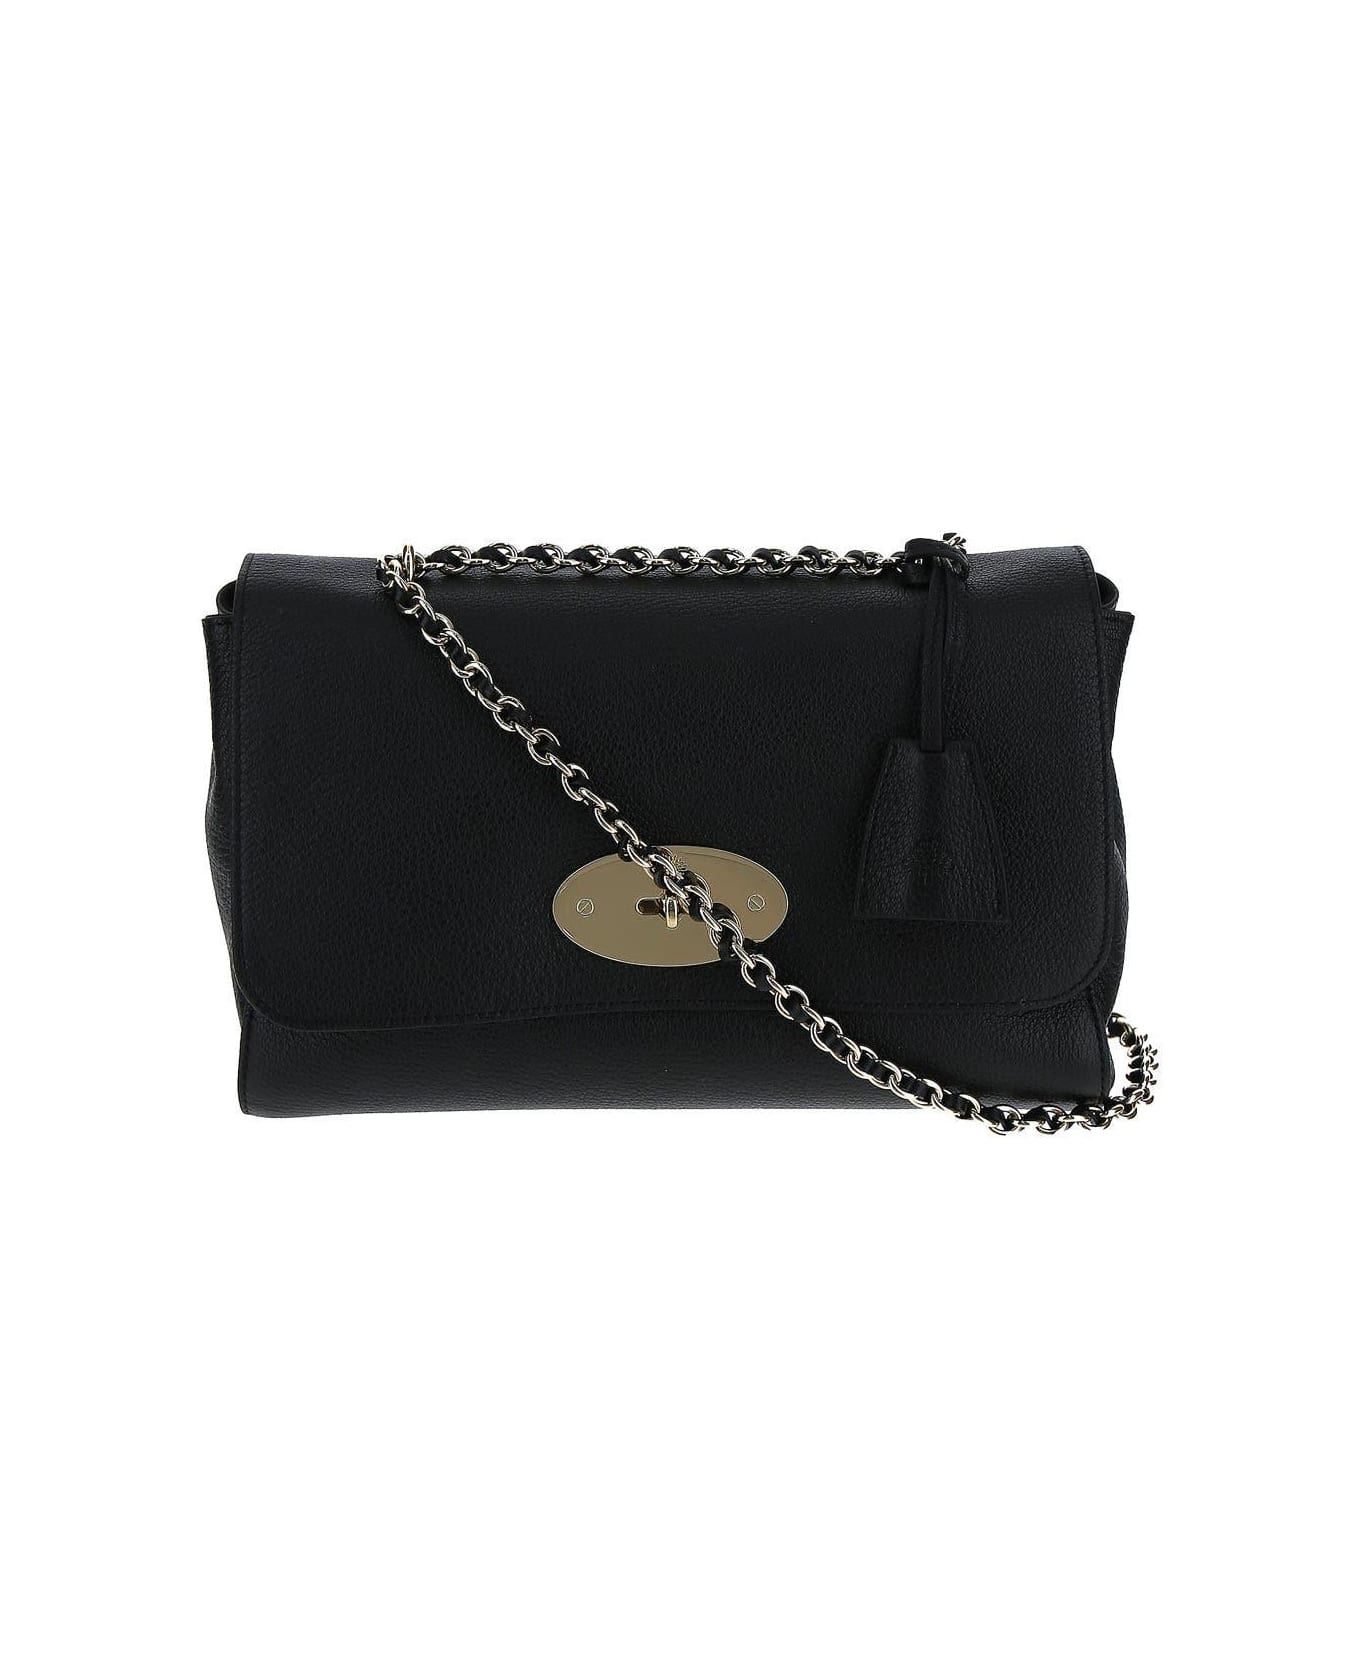 Mulberry Medium Top Handle Lily